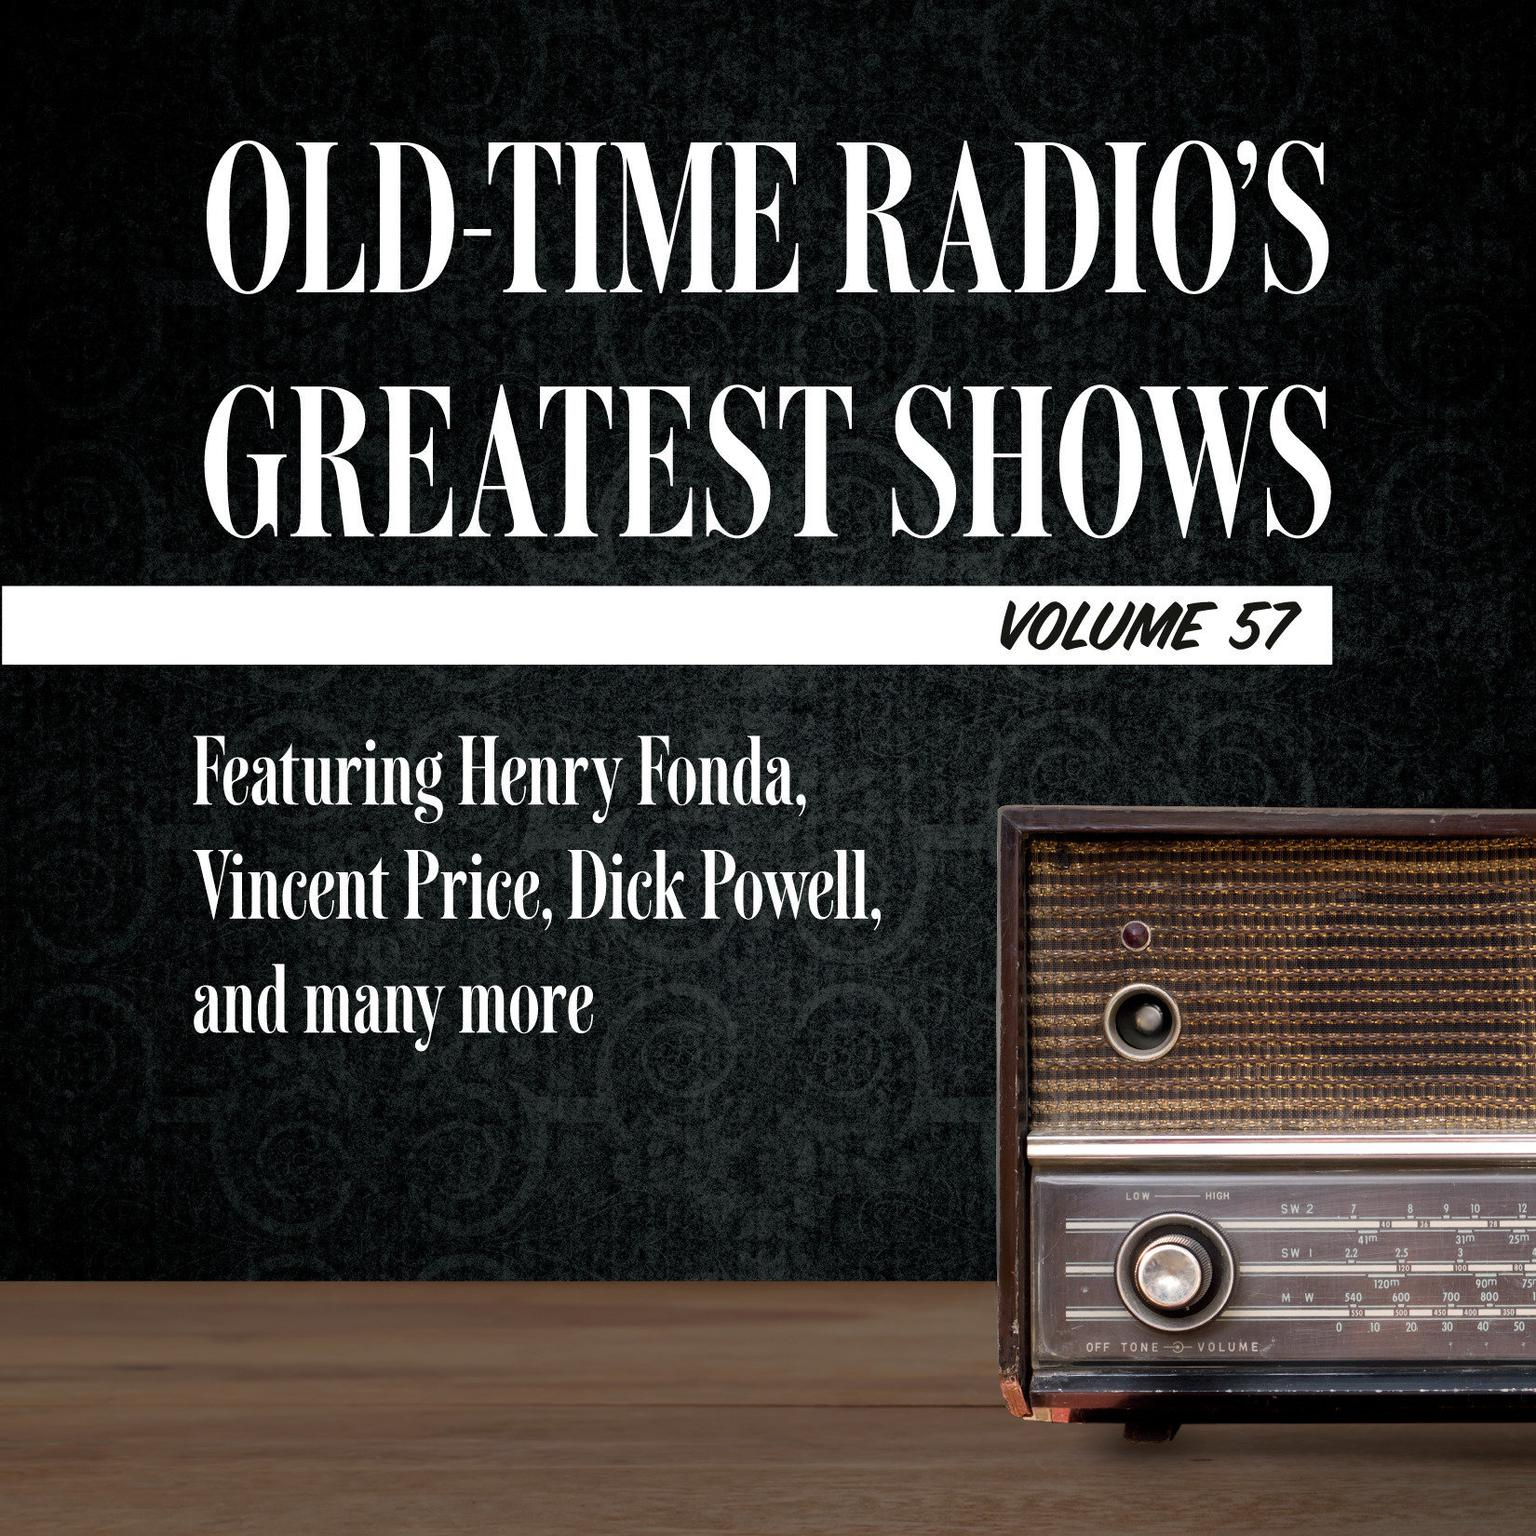 Old-Time Radios Greatest Shows, Volume 57: Featuring Henry Fonda, Vincent Price, Dick Powell, and many more Audiobook, by Carl Amari